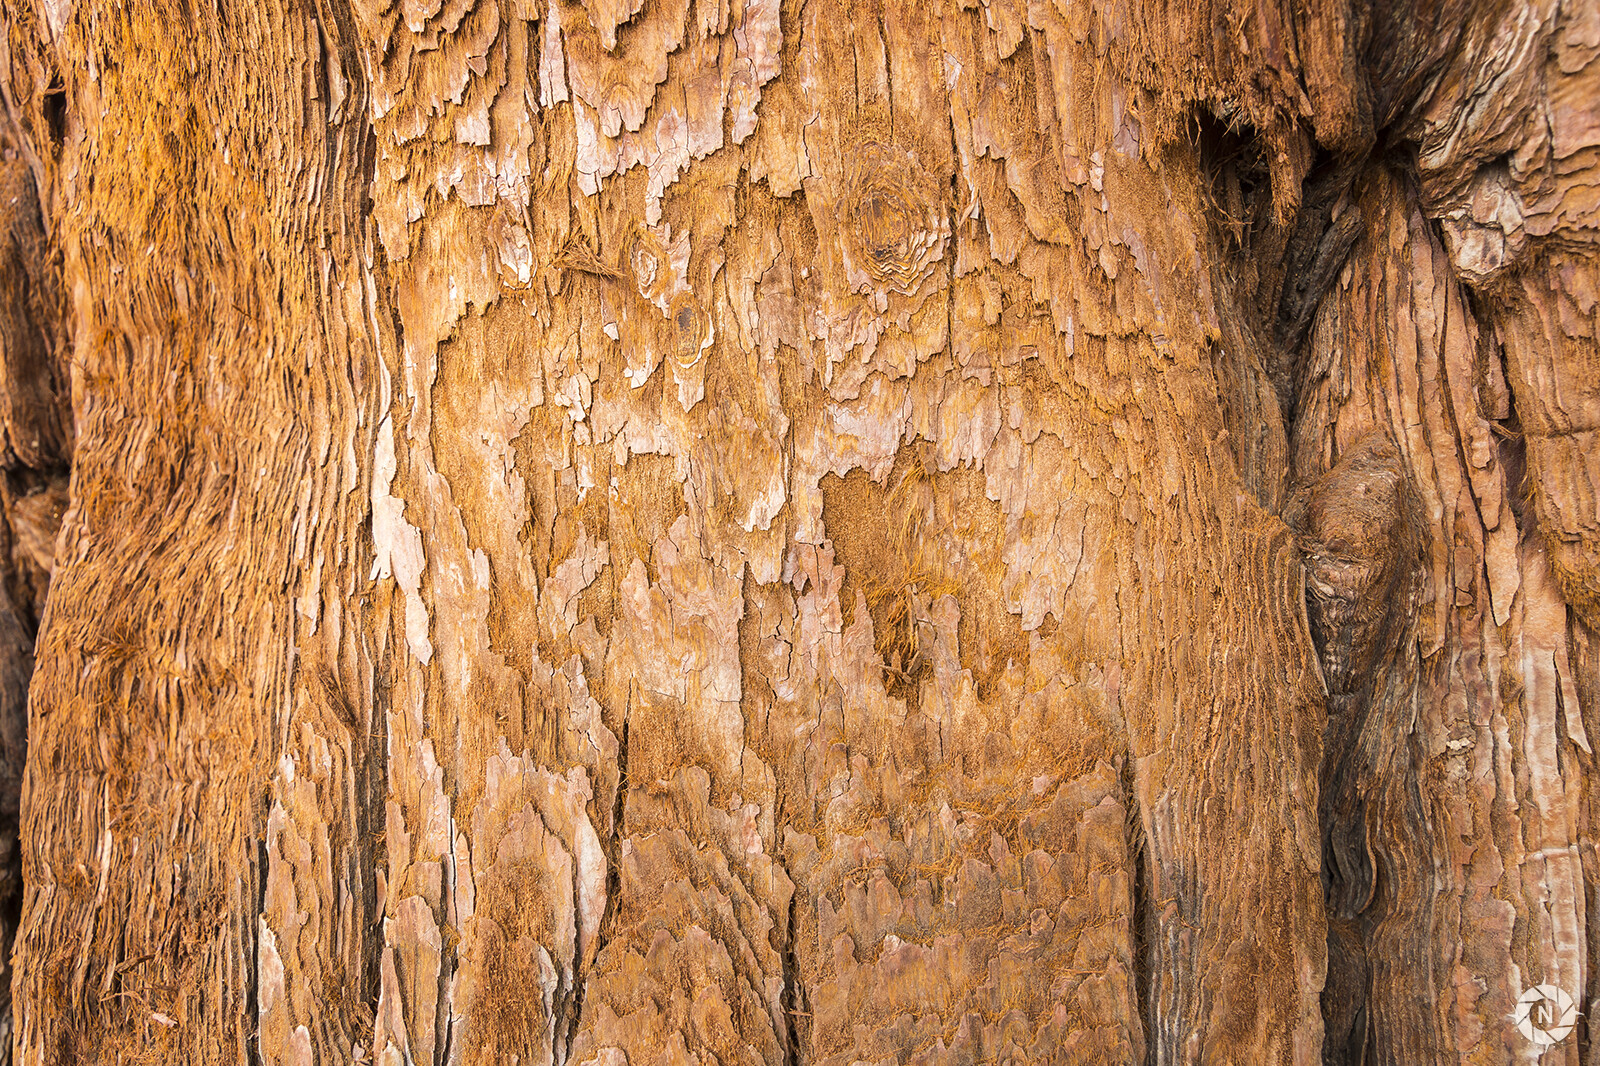 From the Texture Photo Pack: Tree Barks Volume 4

https://www.artstation.com/a/165844